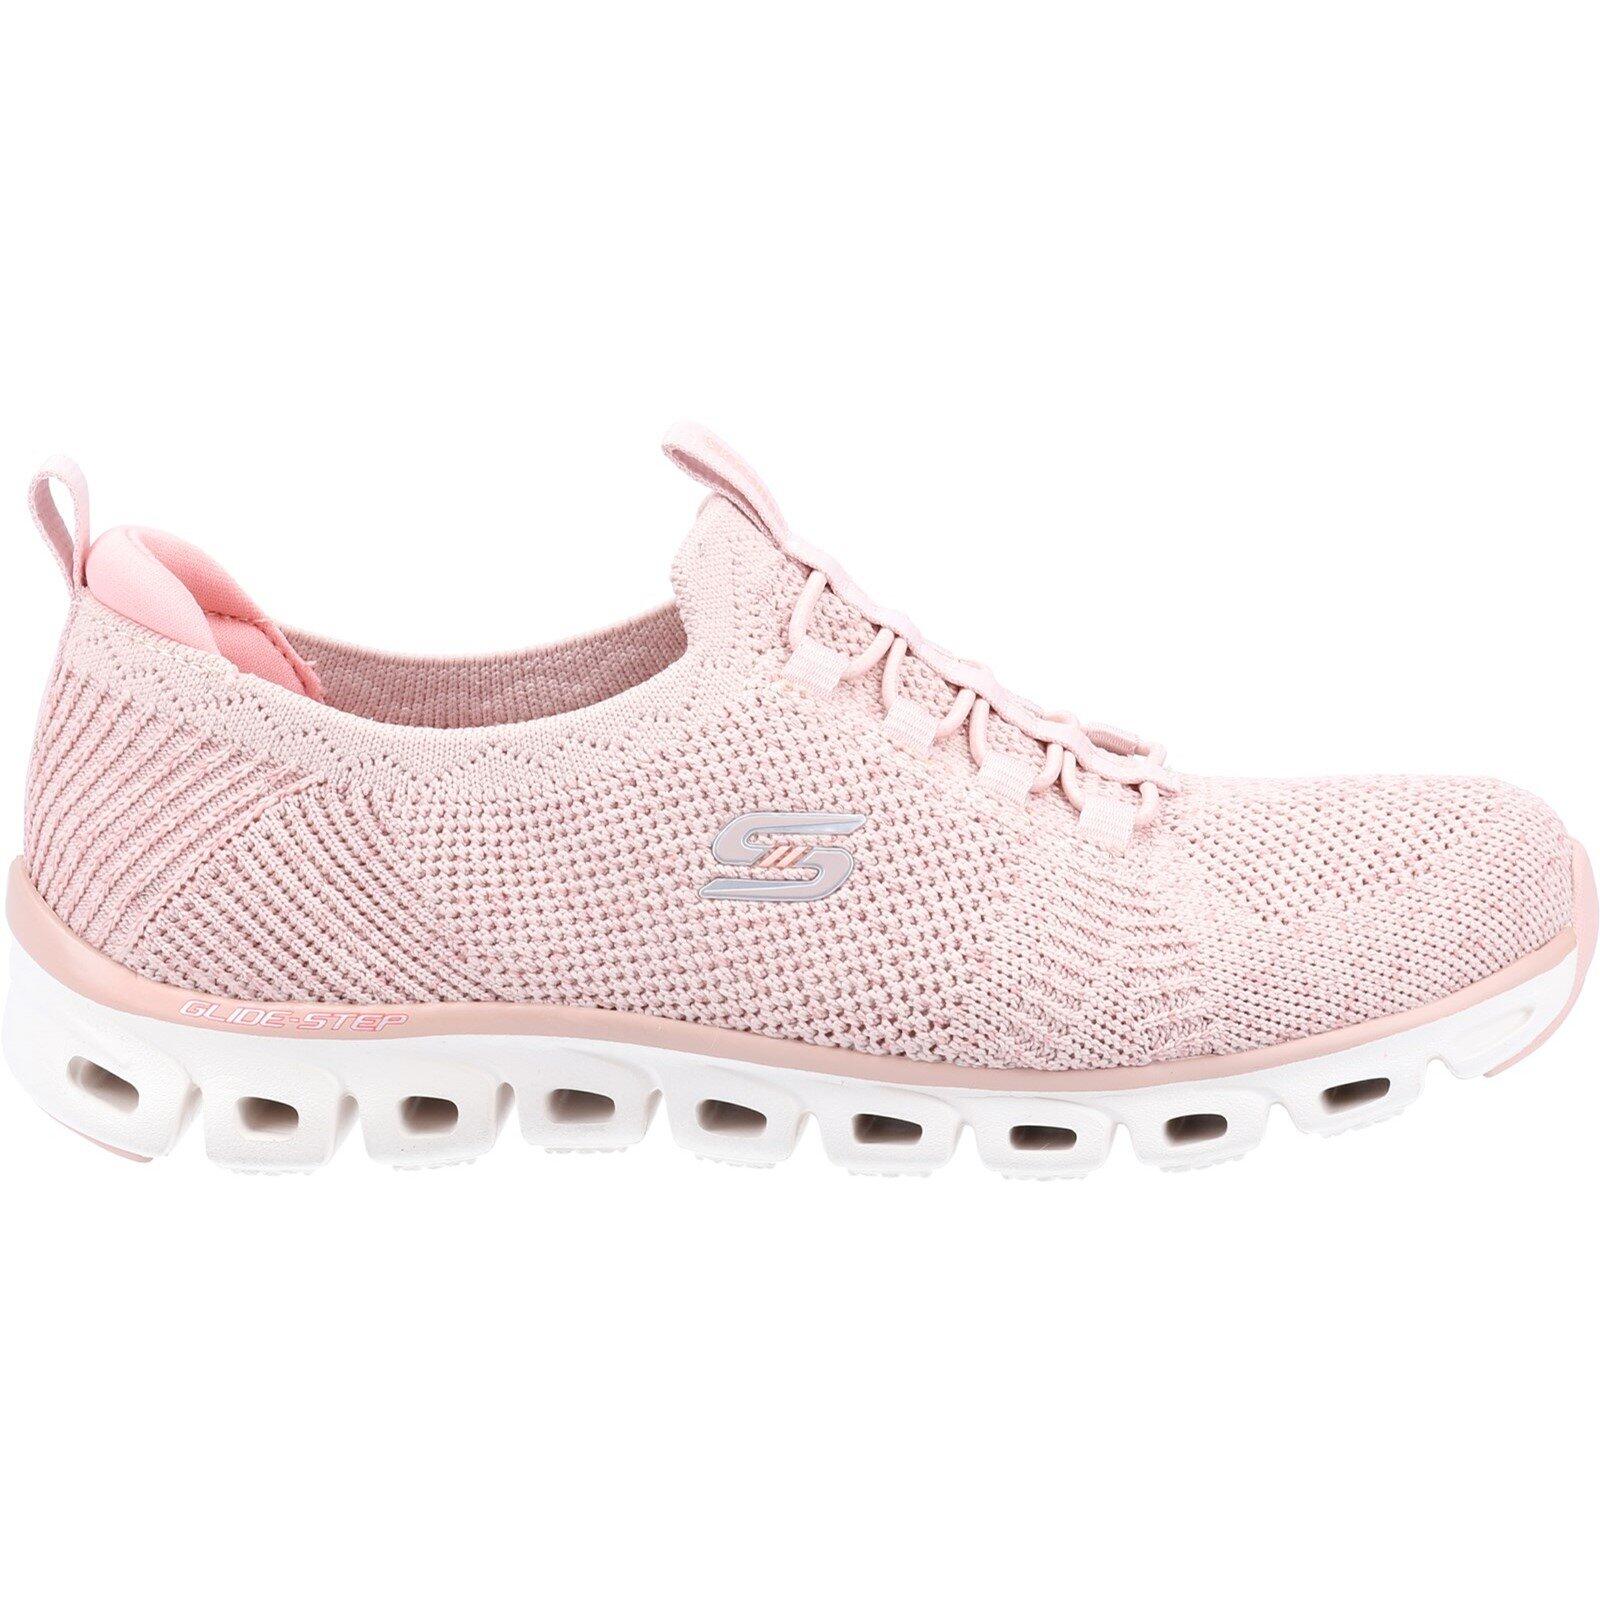 Womens/Ladies Glide Step Grand Flash Trainers (Rose) 2/5